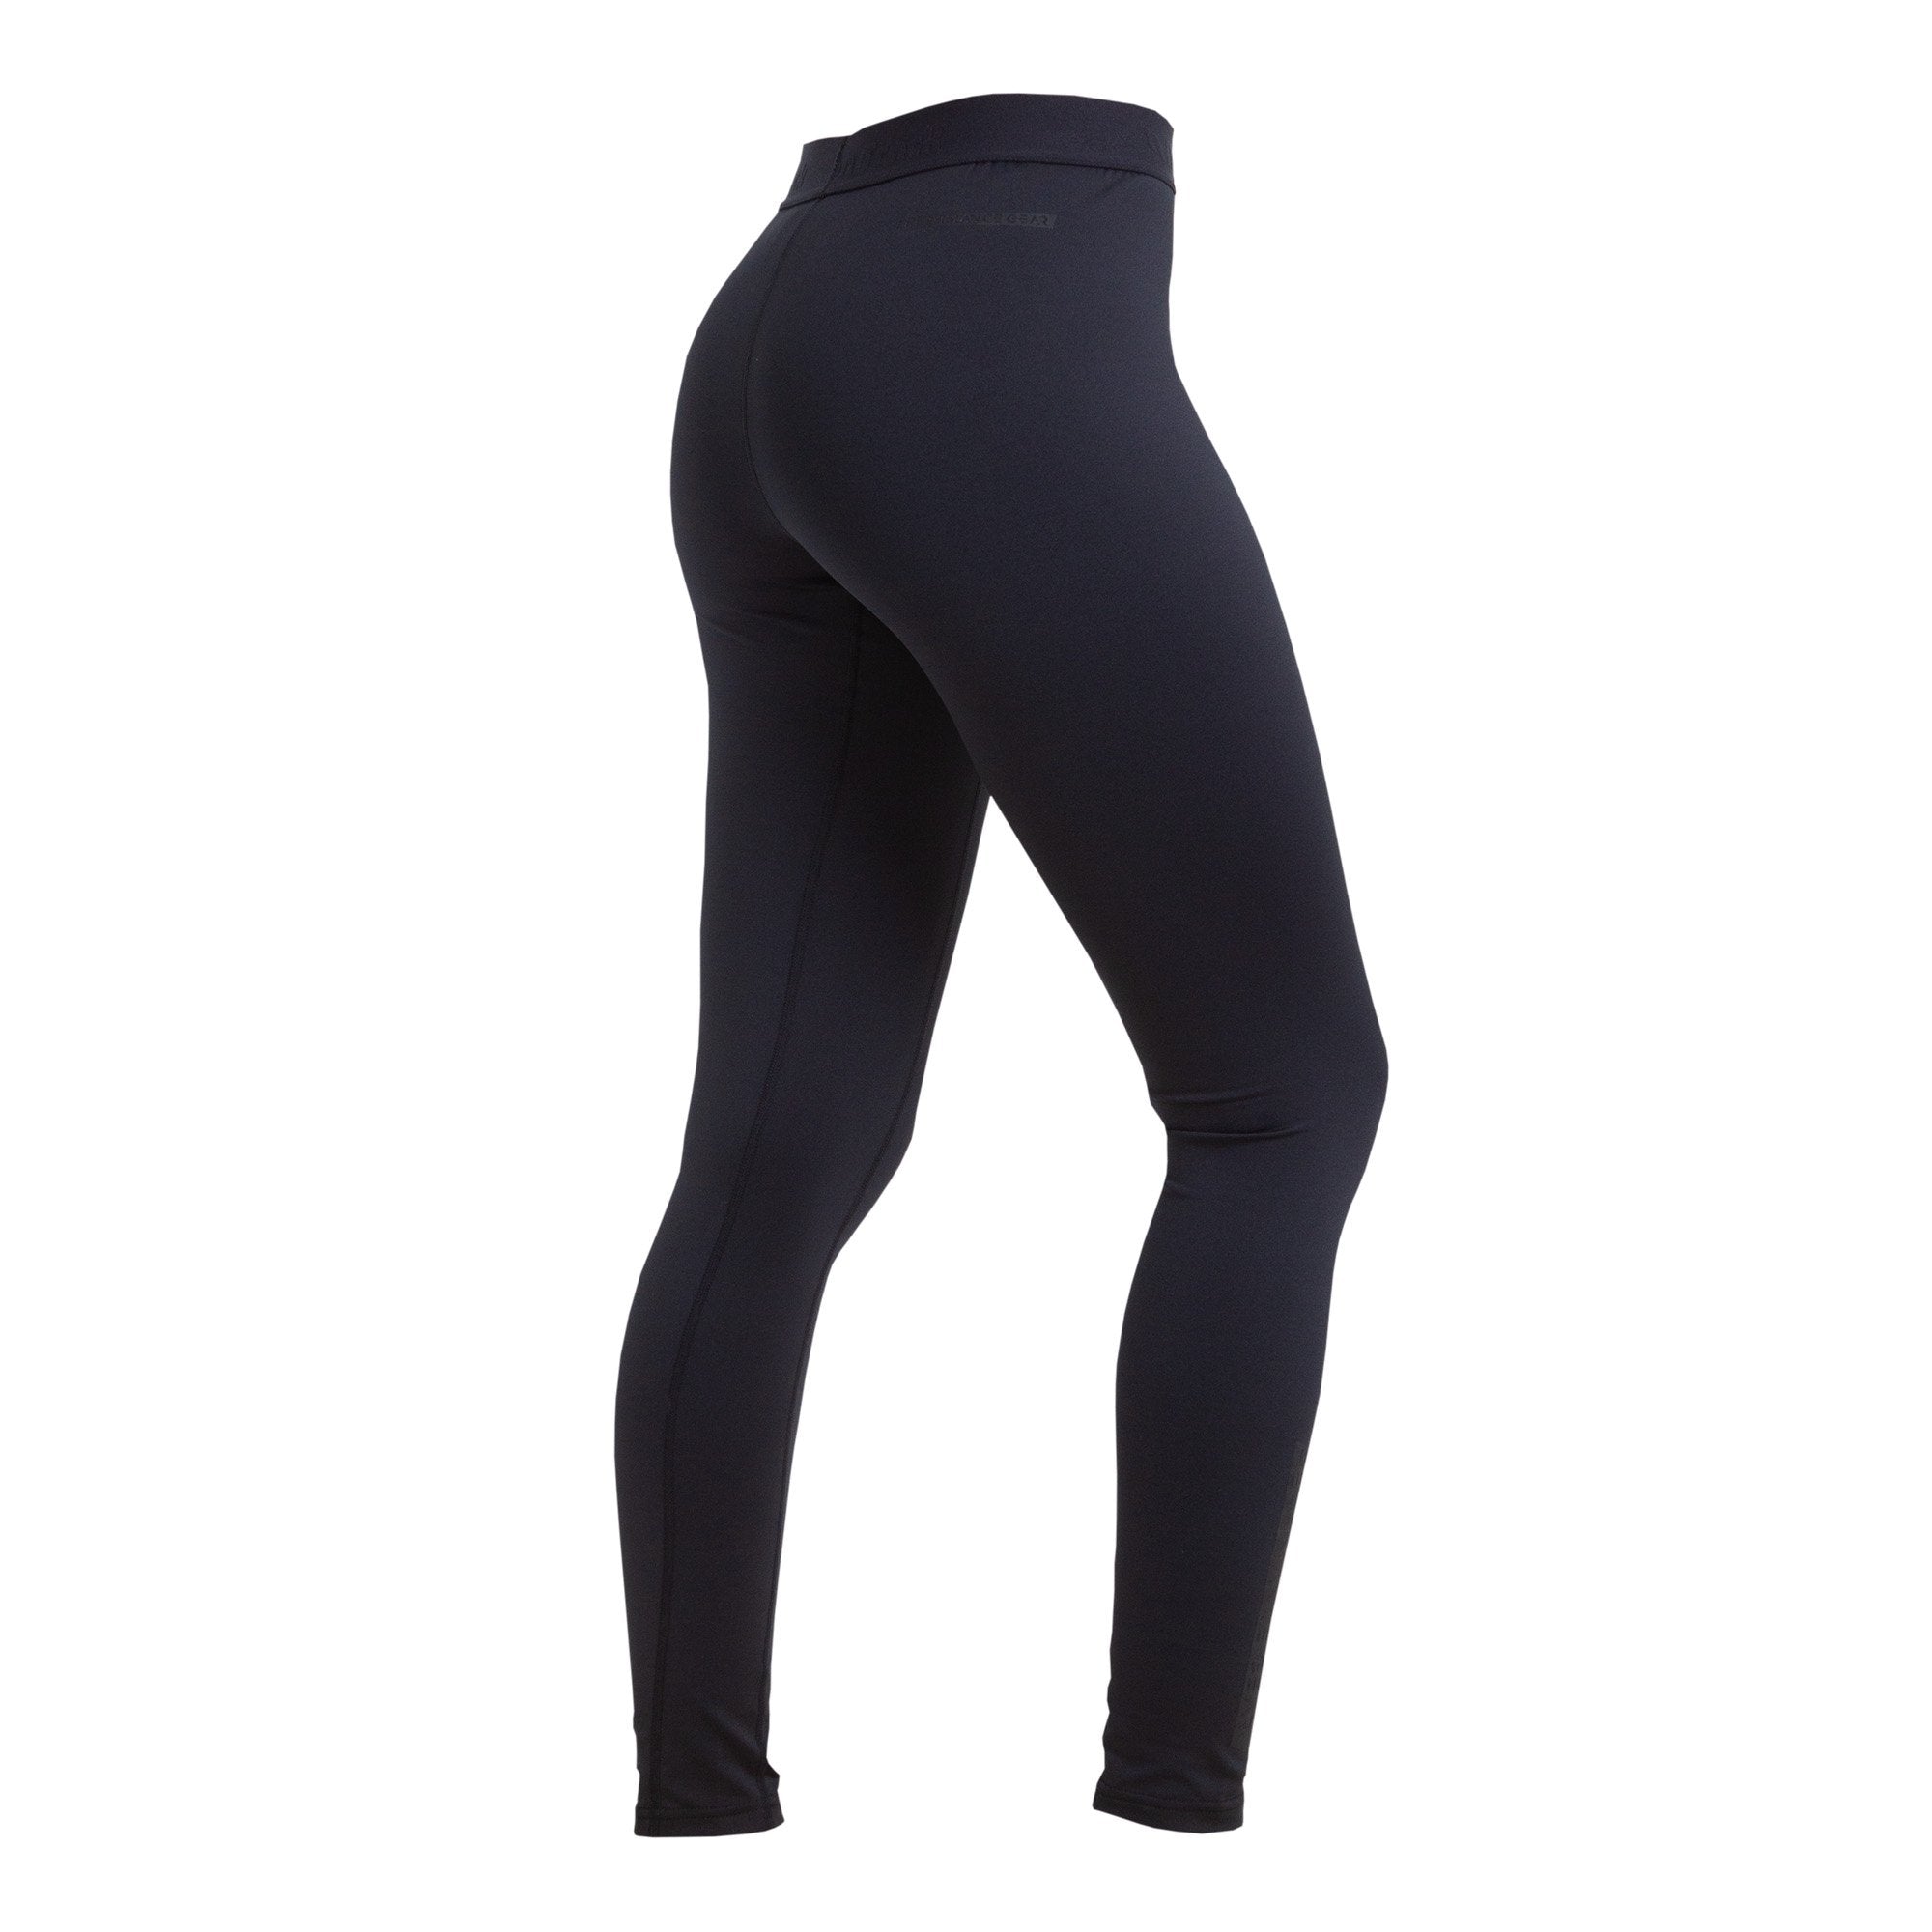 P4G Woman Caia Tights - Back on Track Sverige (5300139294875)